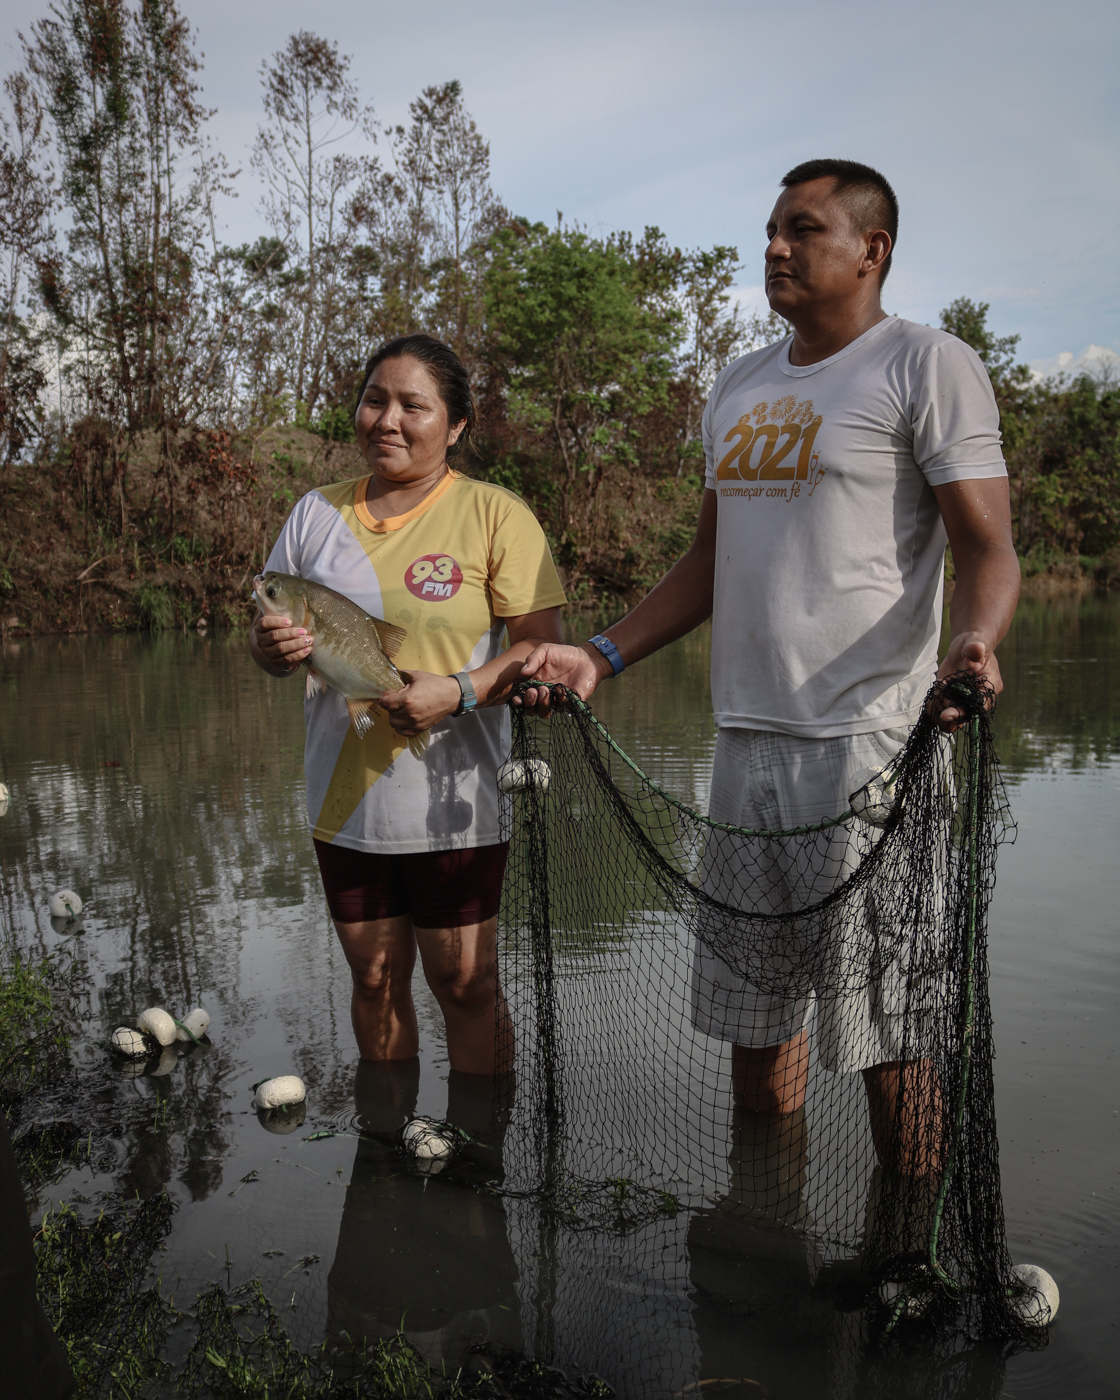 Since 2017, Machado and Silva, along with five other members of the farmers’ association, have cultivated fish in a pond behind the couple’s house.